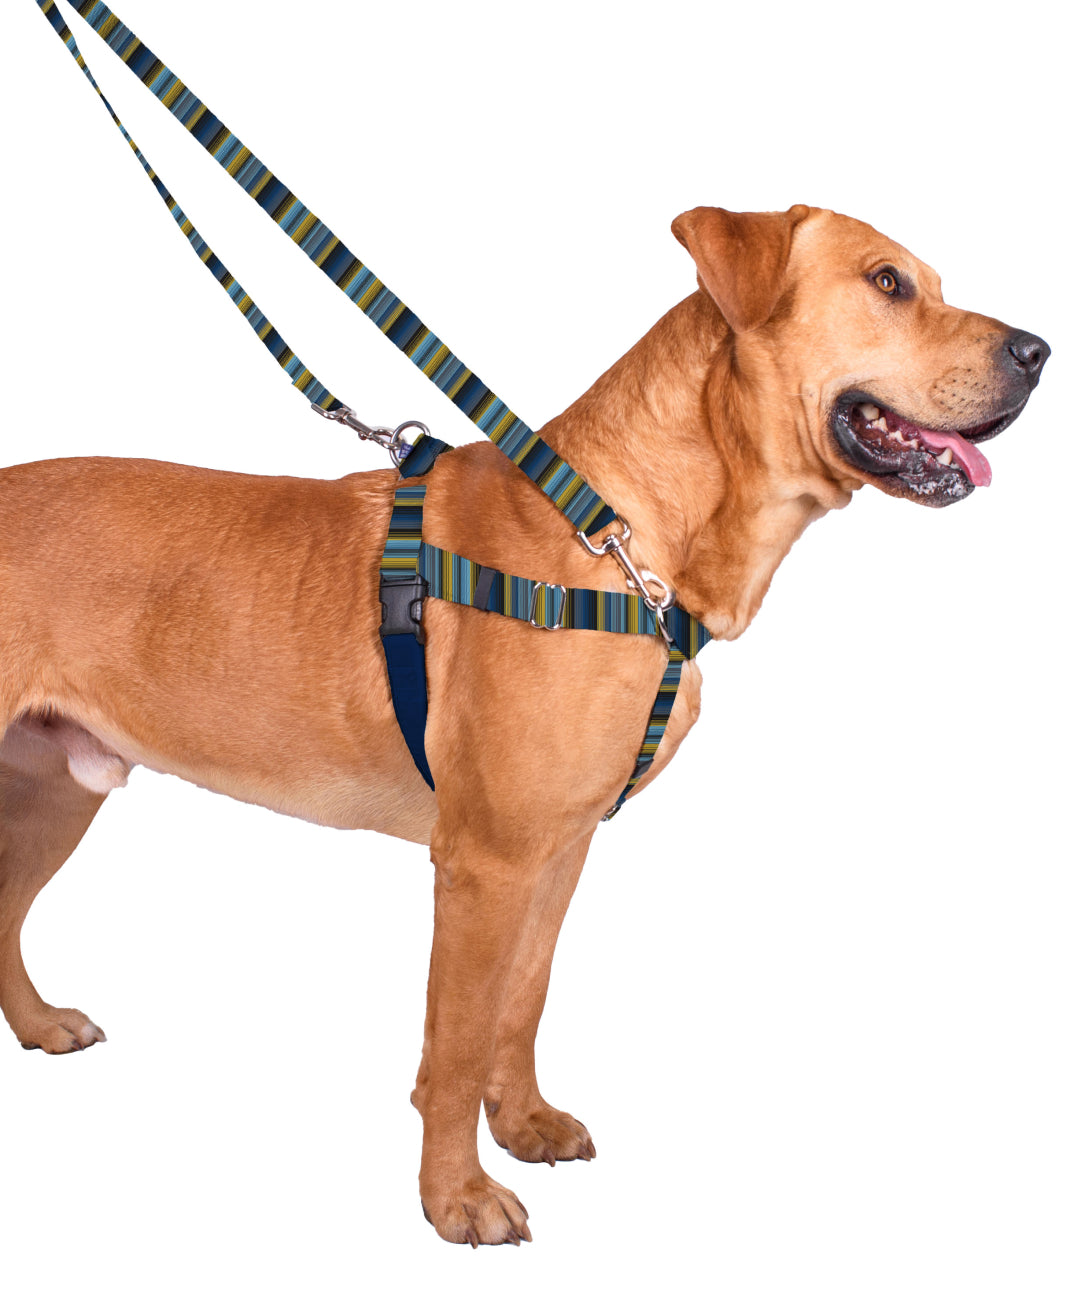 2 Hounds EarthStyle Freedom No-Pull Dog Harness Walking Gear Rover Store 